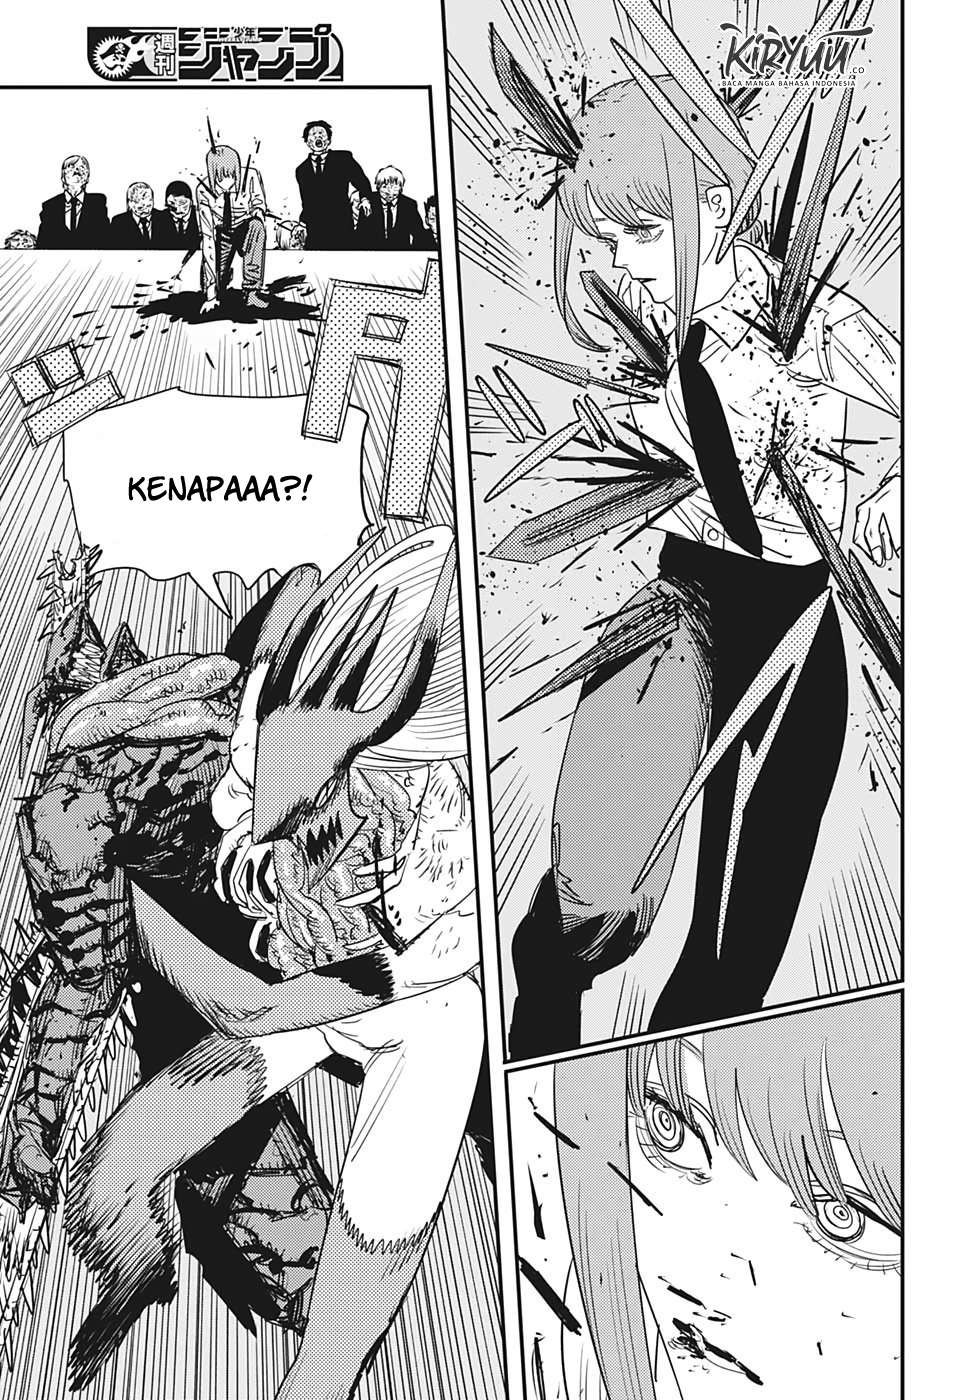 Chainsaw Man Chapter 91 Bahasa Indonesia